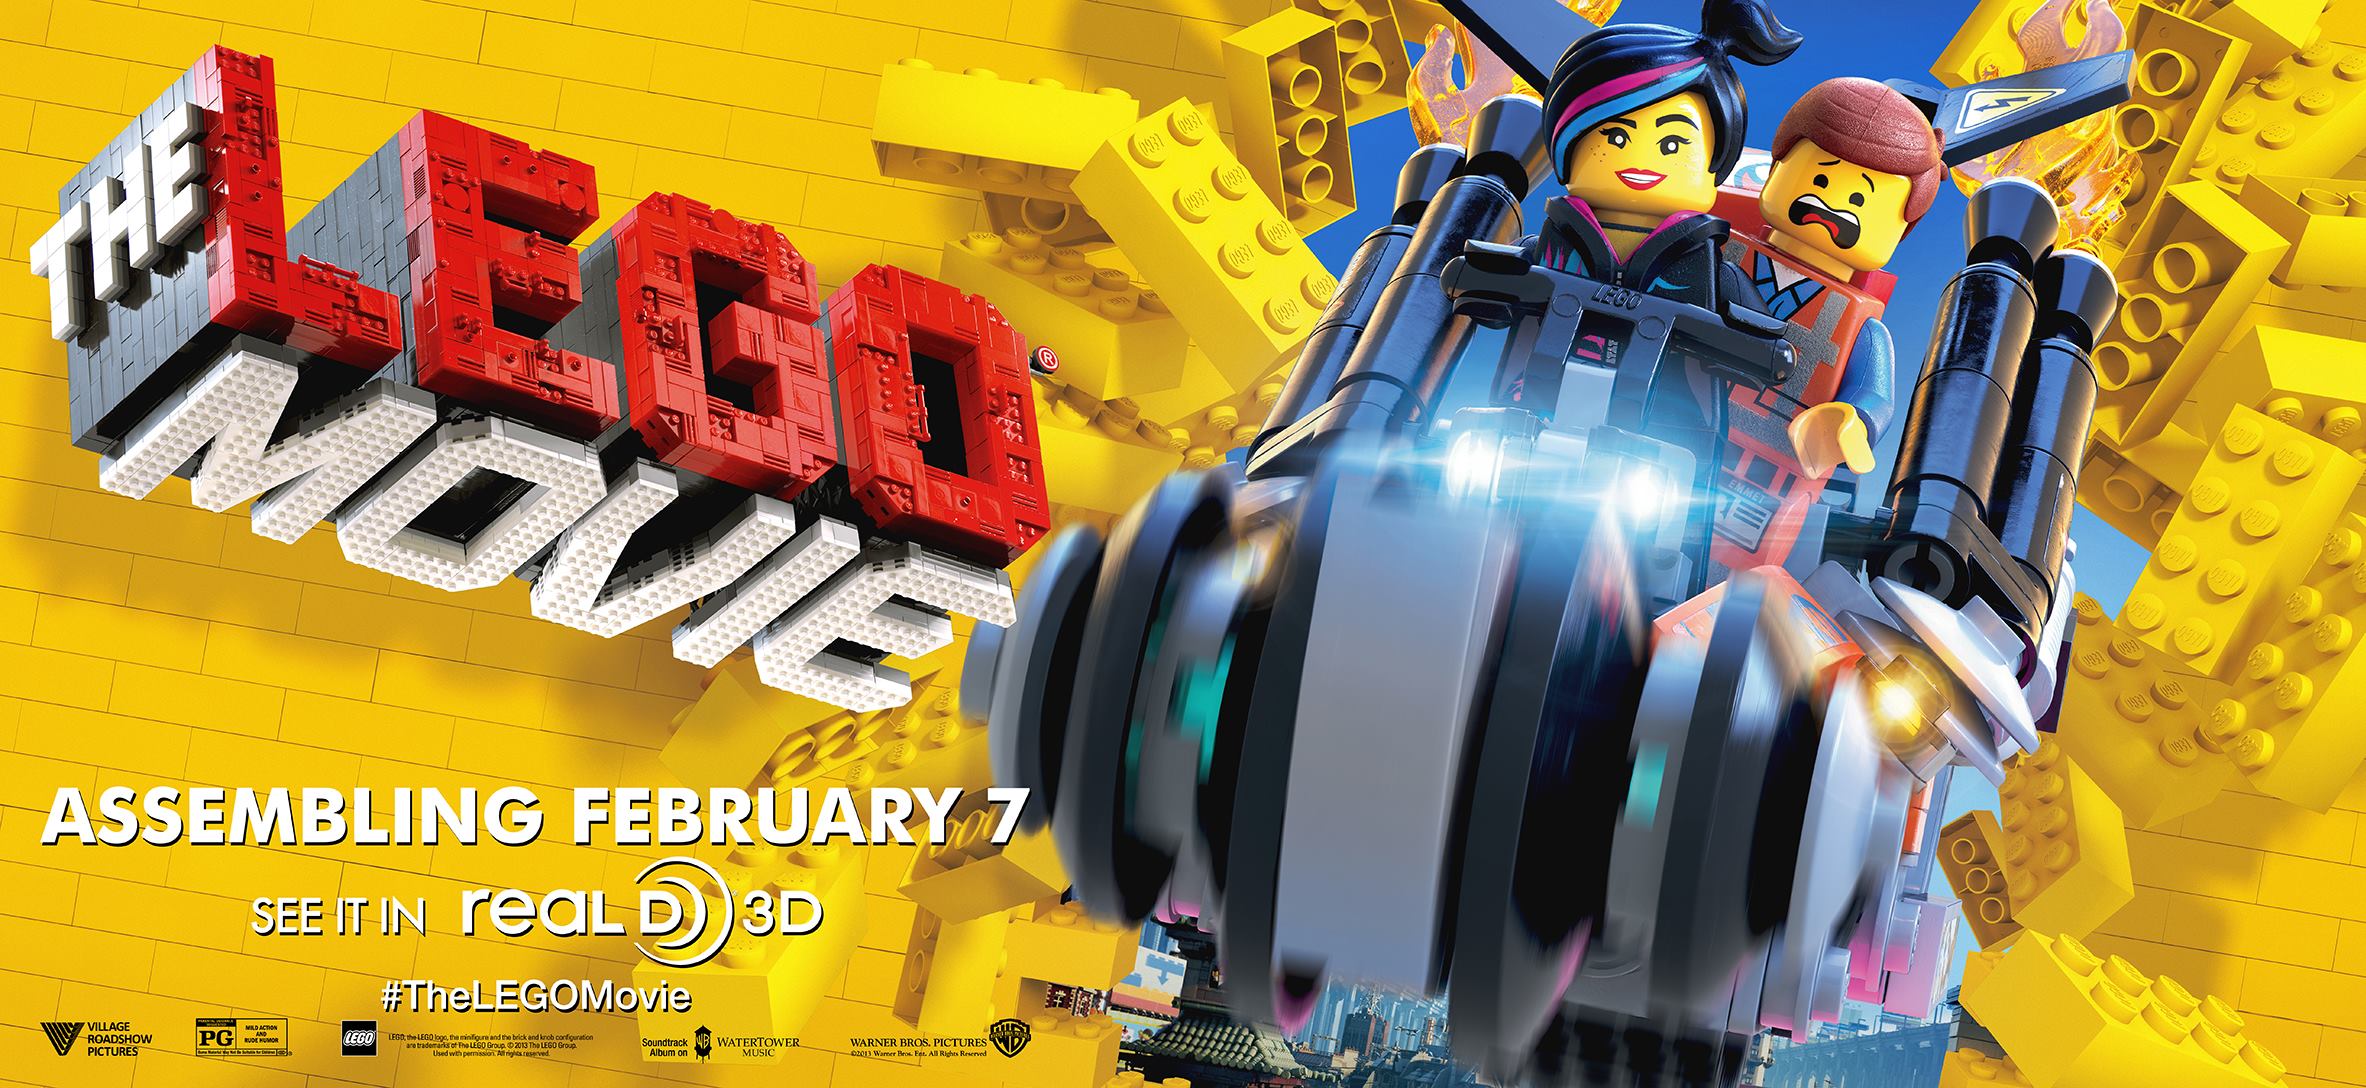 movie, the lego movie, emmet (the lego movie), lego, logo, text, wyldstyle (the lego movie)